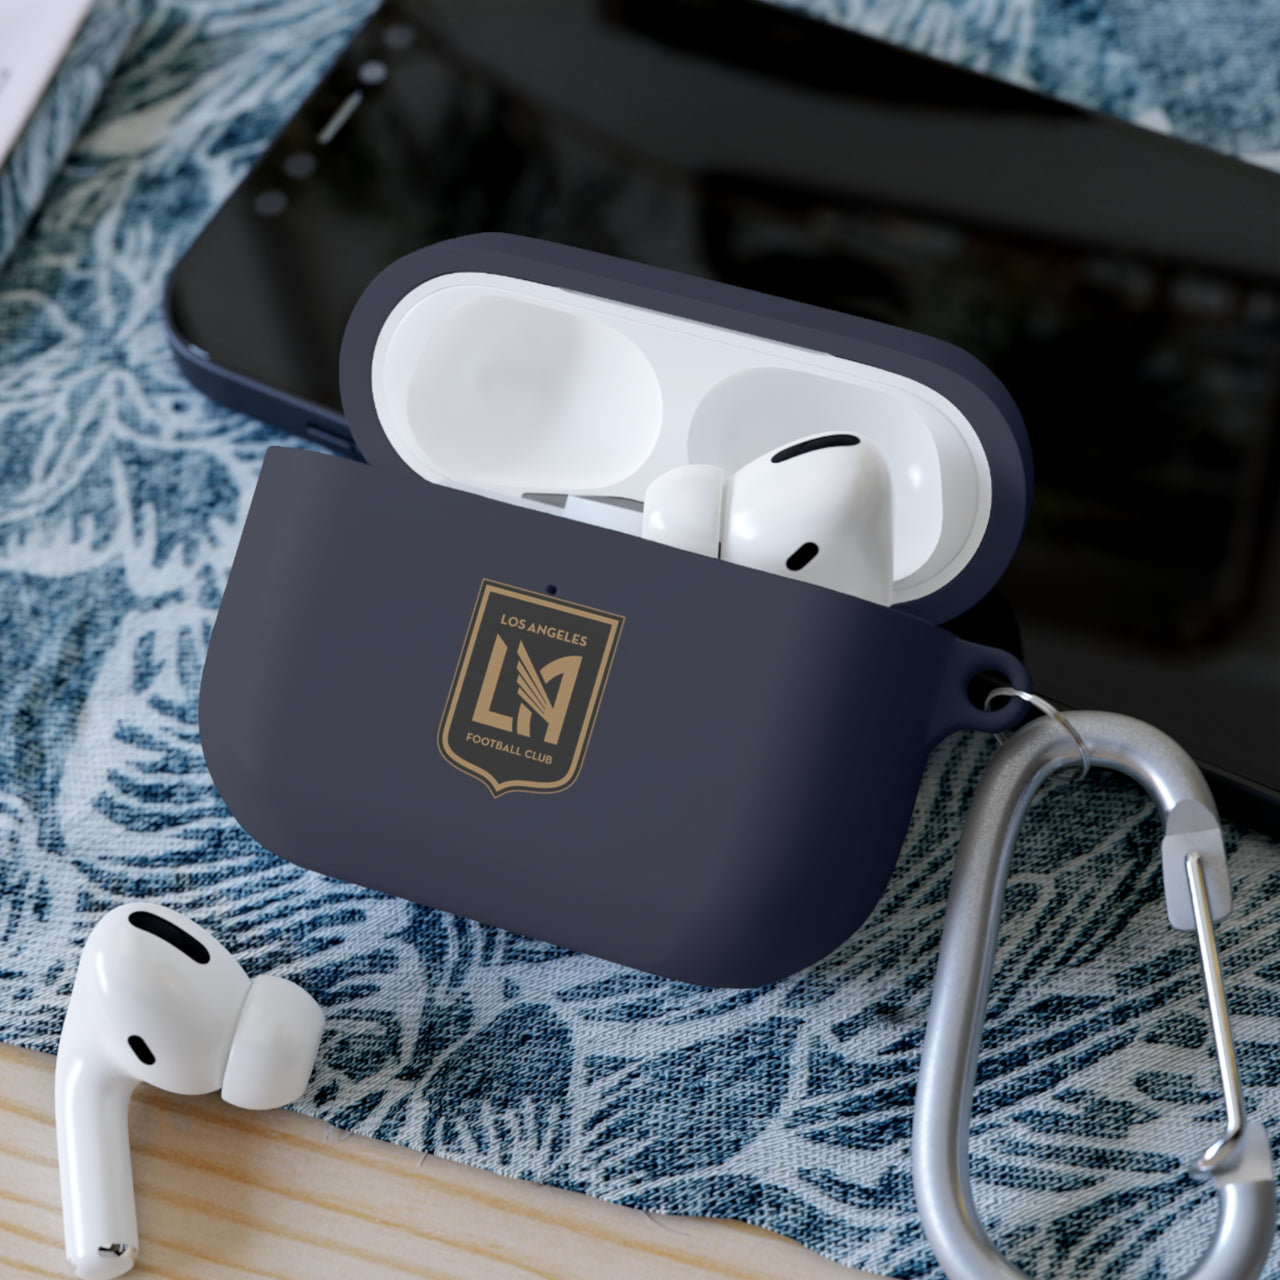 LAFC AirPods and AirPods Pro Case Cover